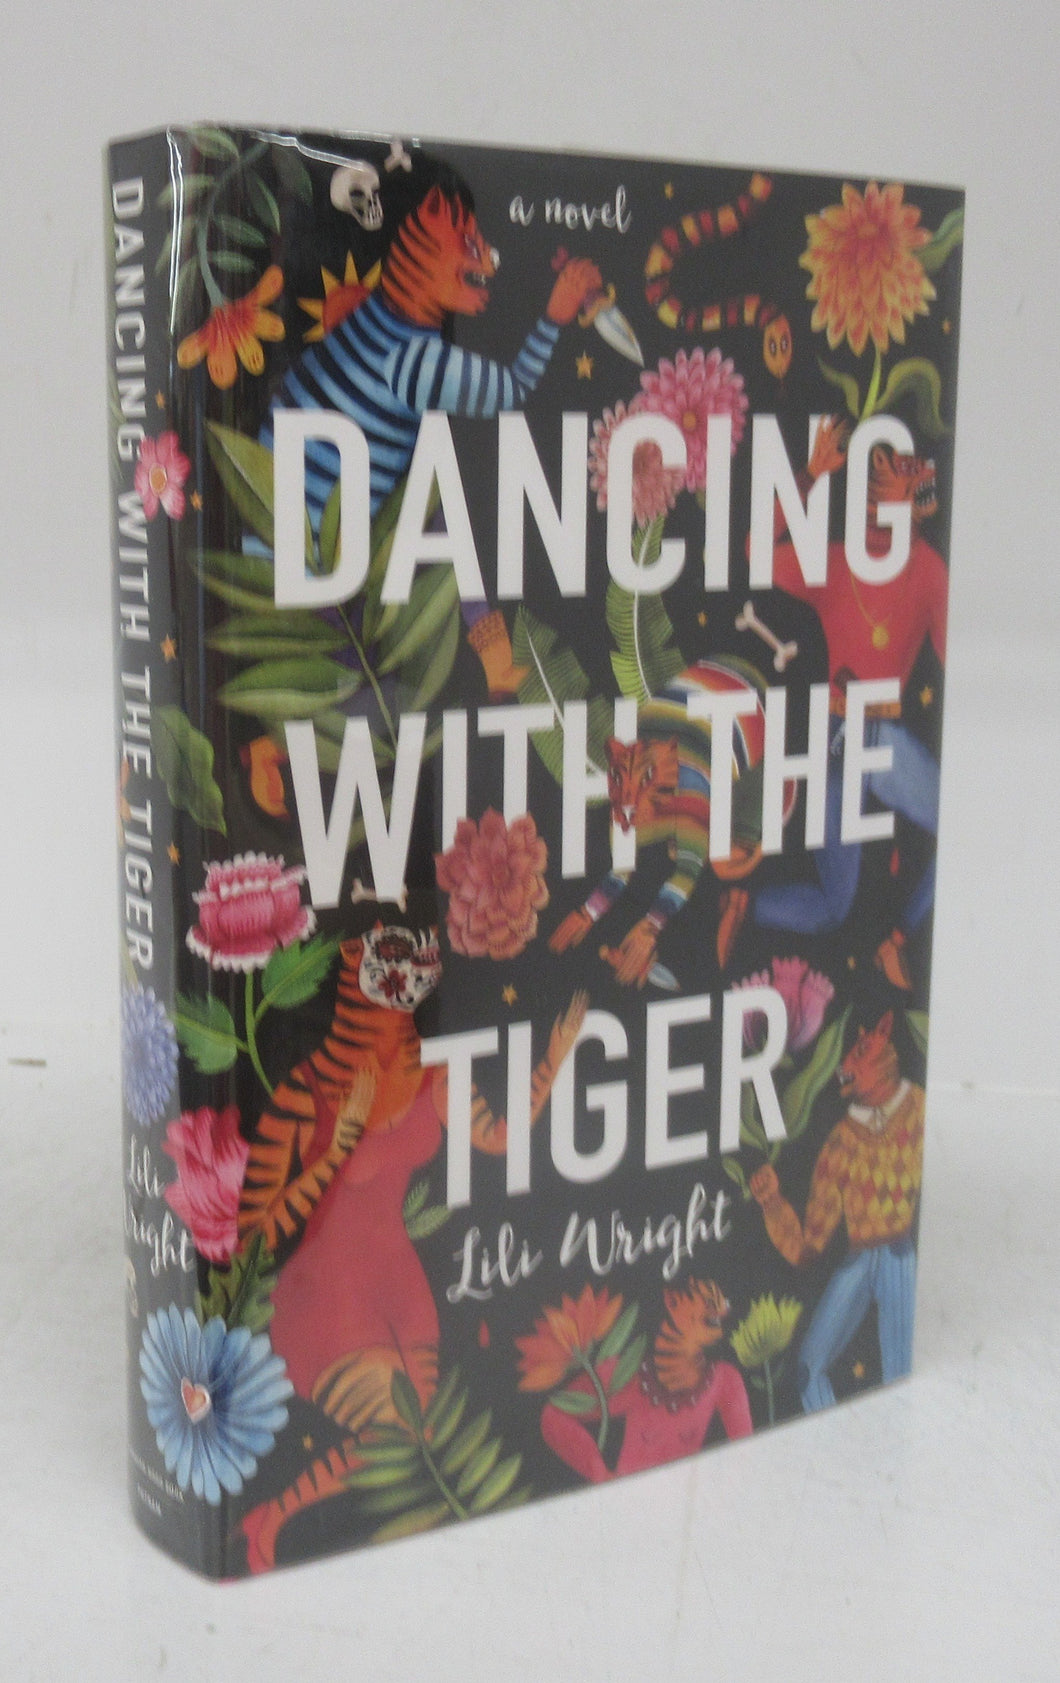 Dancing With The Tiger